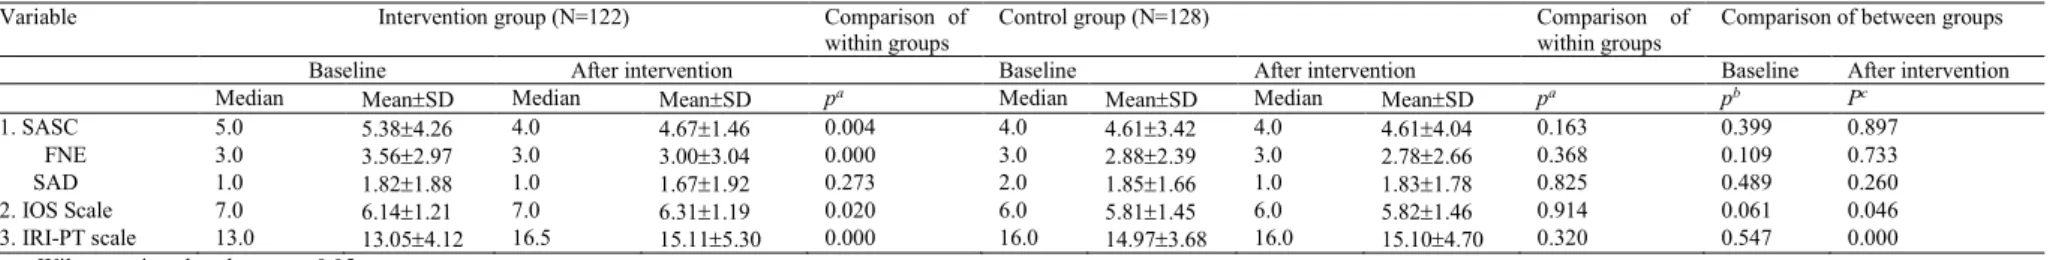 Table 3. Values in measurements for the intervention and control groups before and after interventions